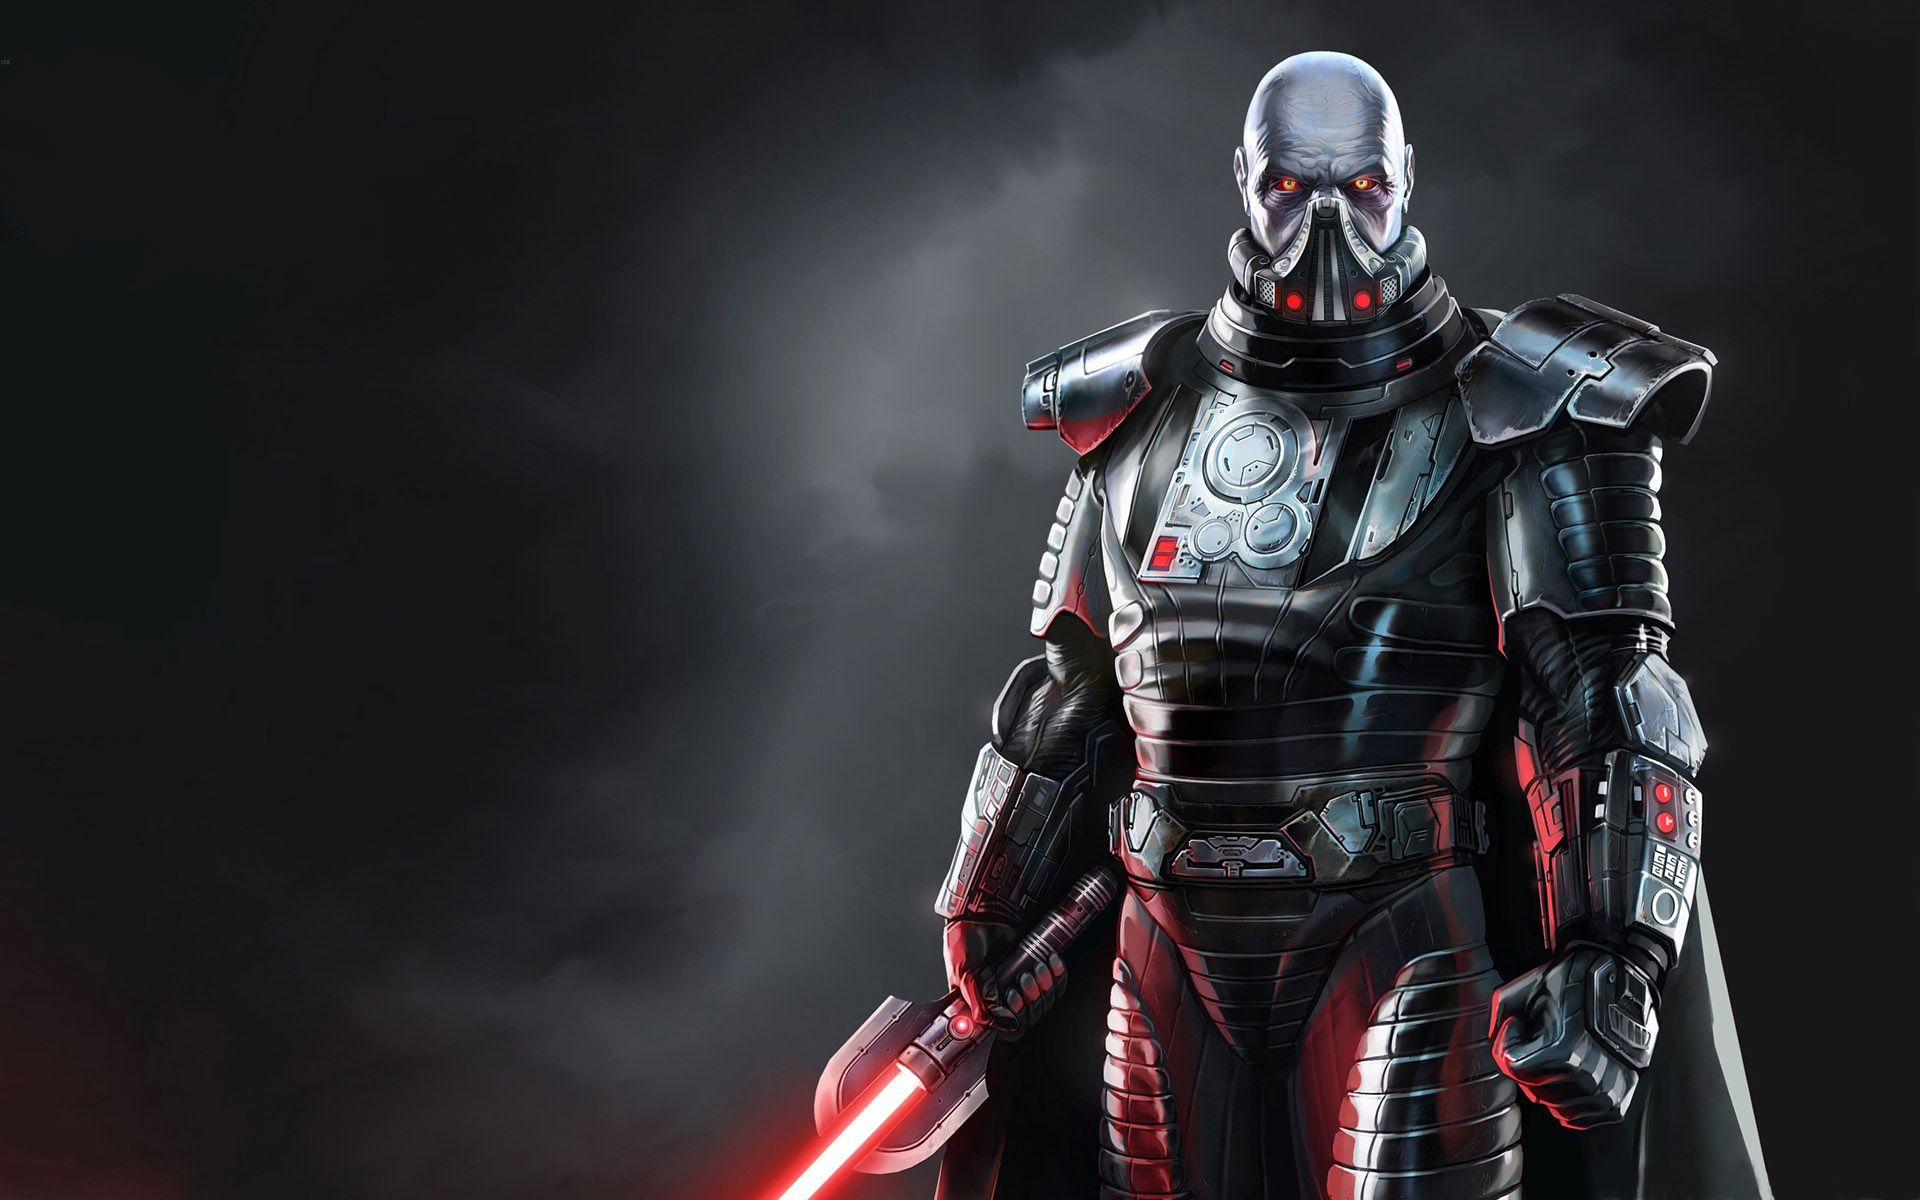 Star wars the force unleashed 2 wallpapers in hd 2 | Chainimage